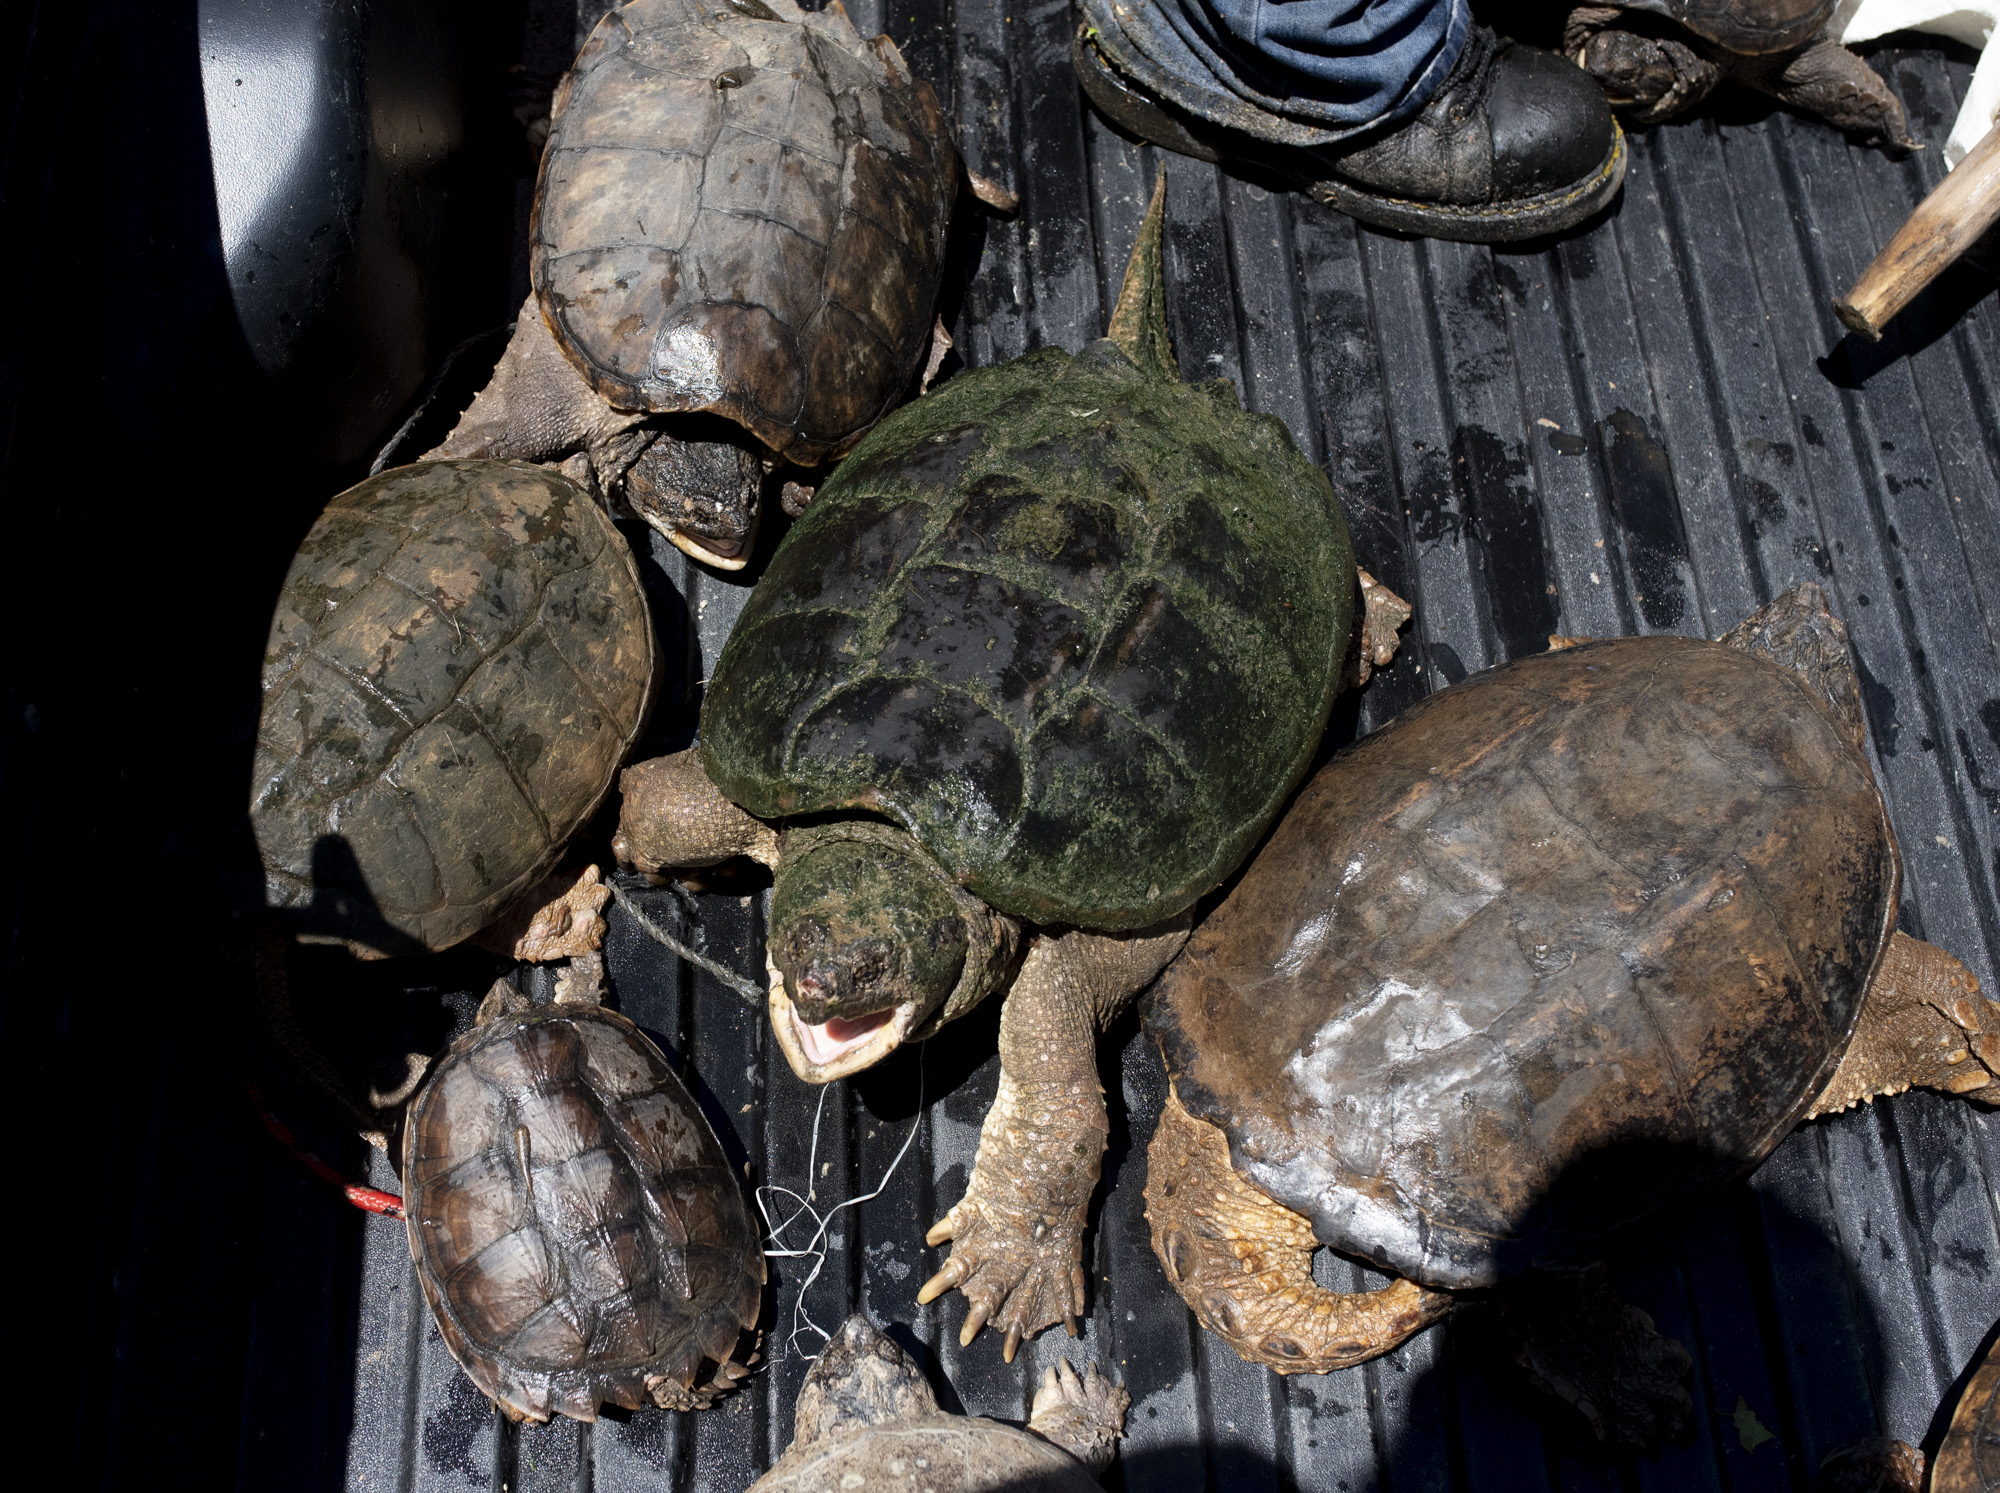  Snapping turtles hiss in the back of Joe Clemen's truck on July 7, 2018. The Clemens at the end of the day normally release the turtles back into the creek after taking photos with the turtles. 